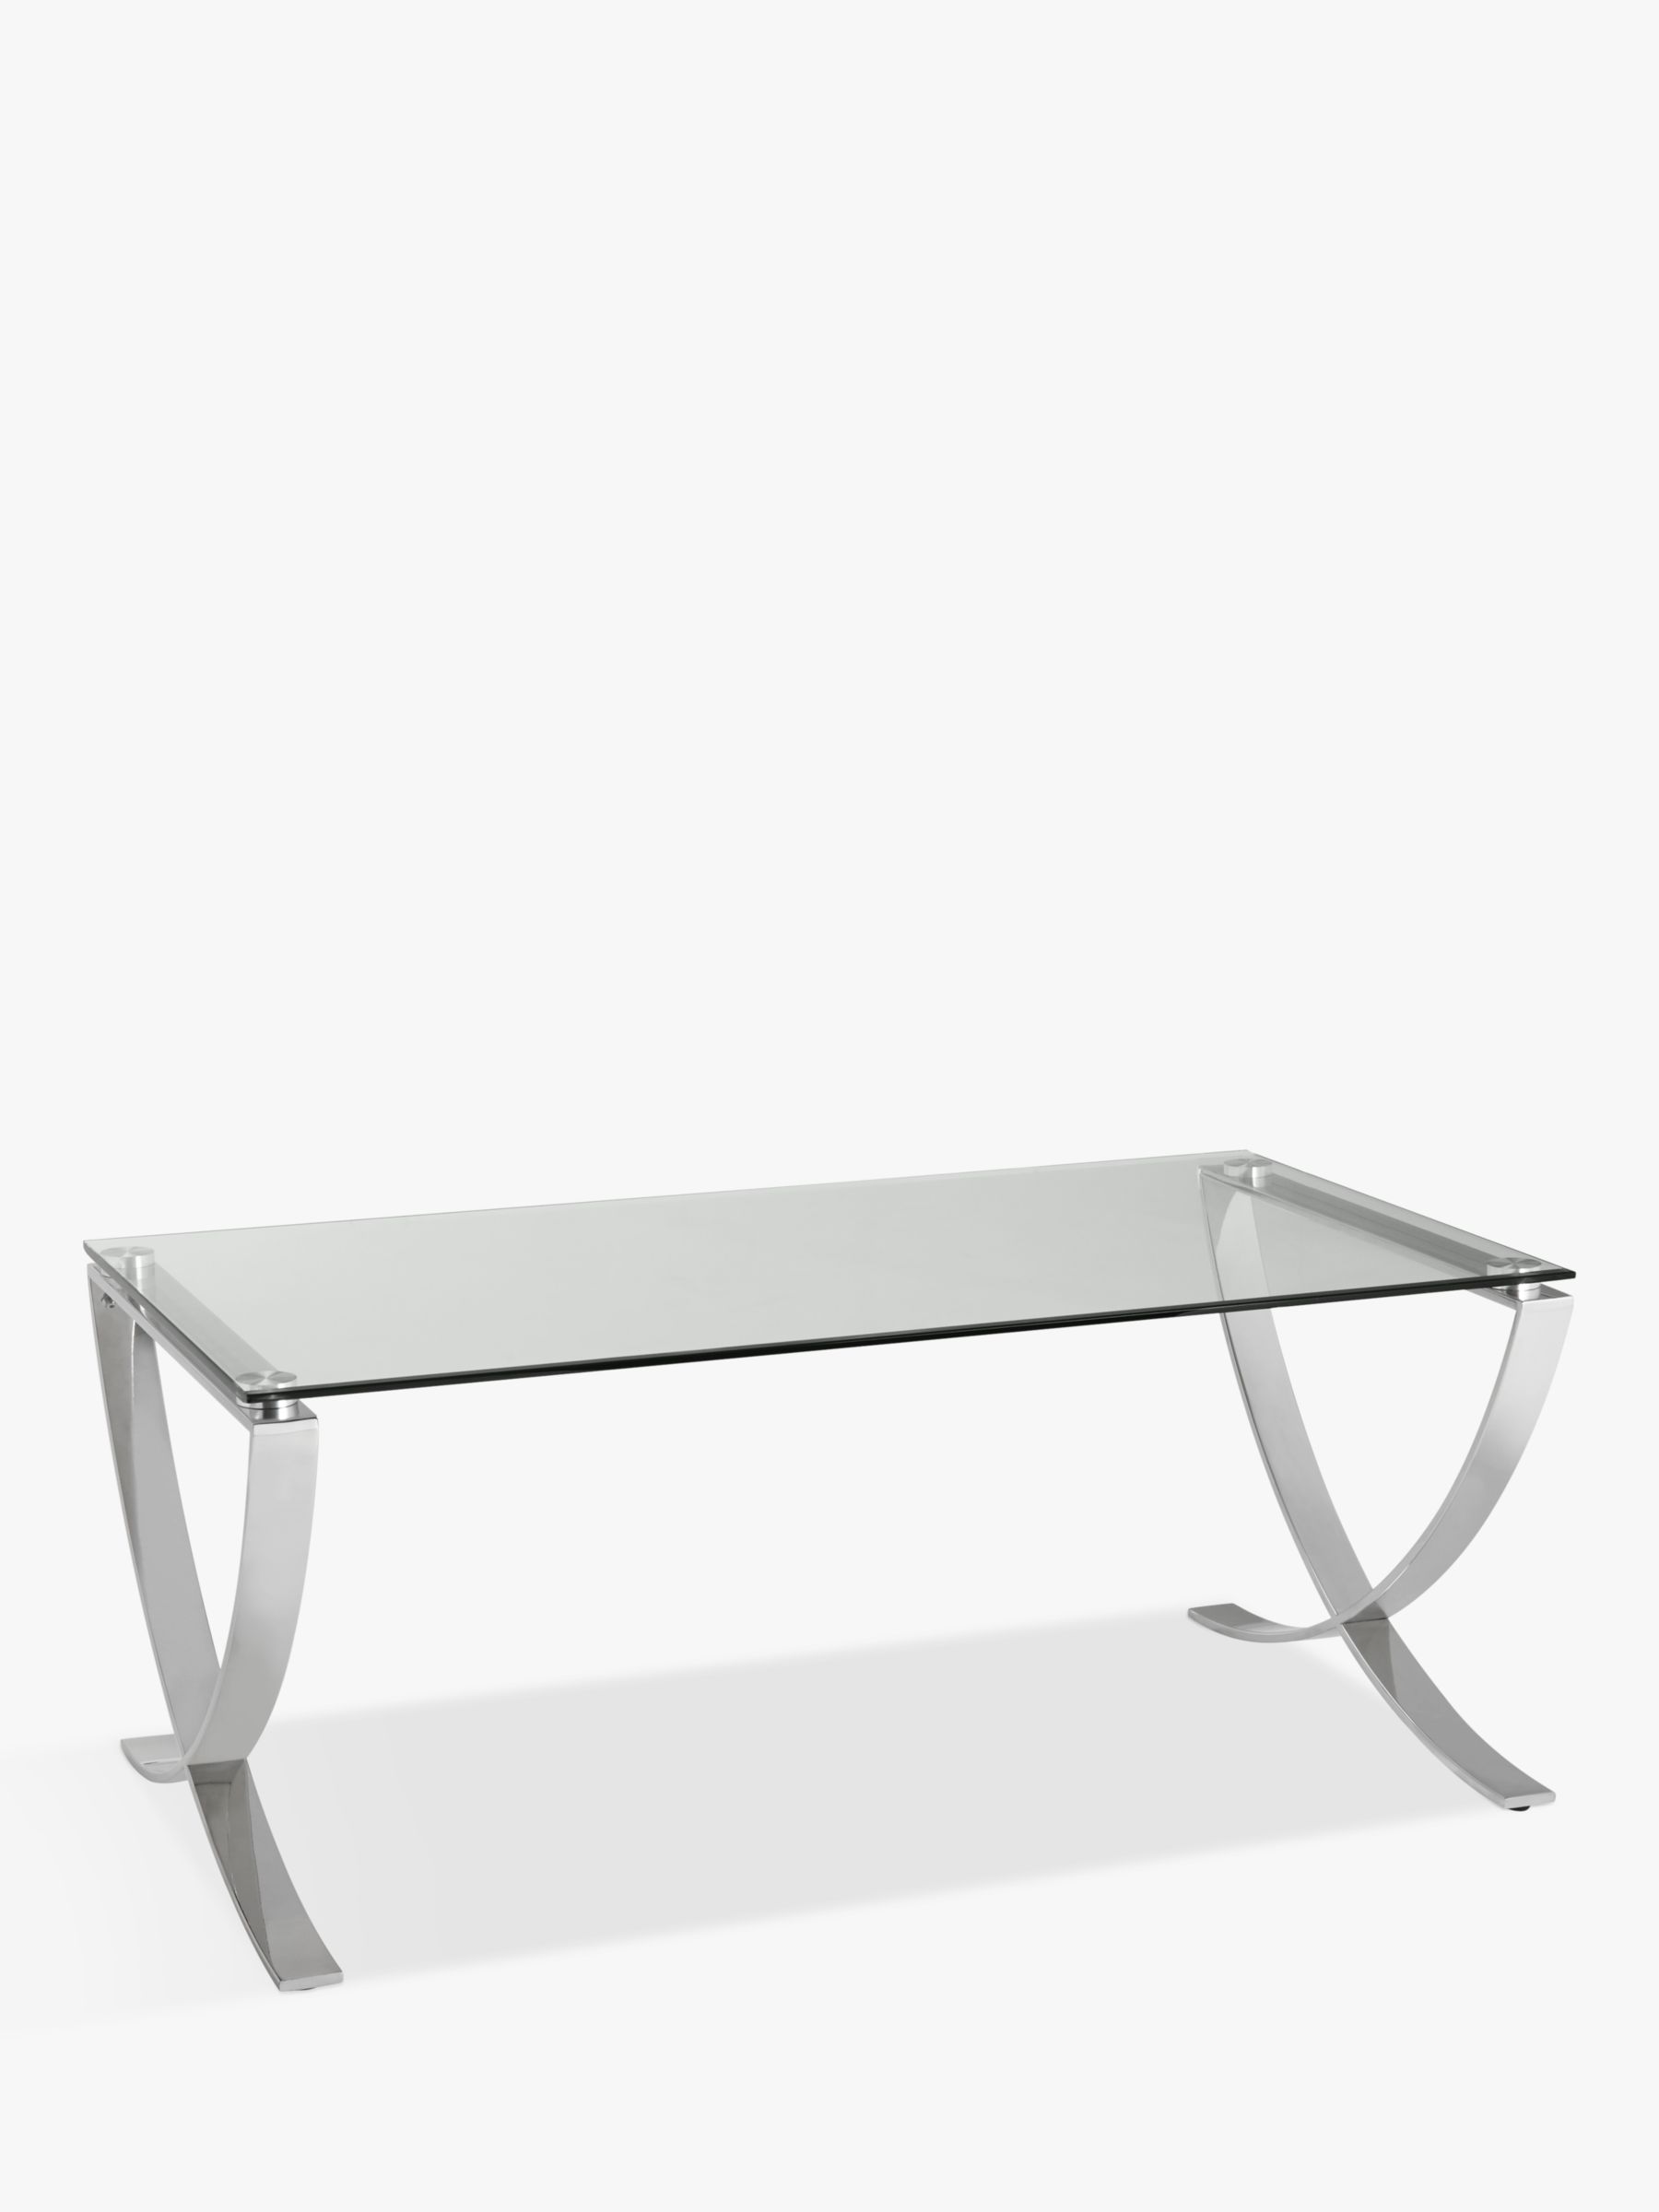 Photo of John lewis moritz coffee table clear/polished steel